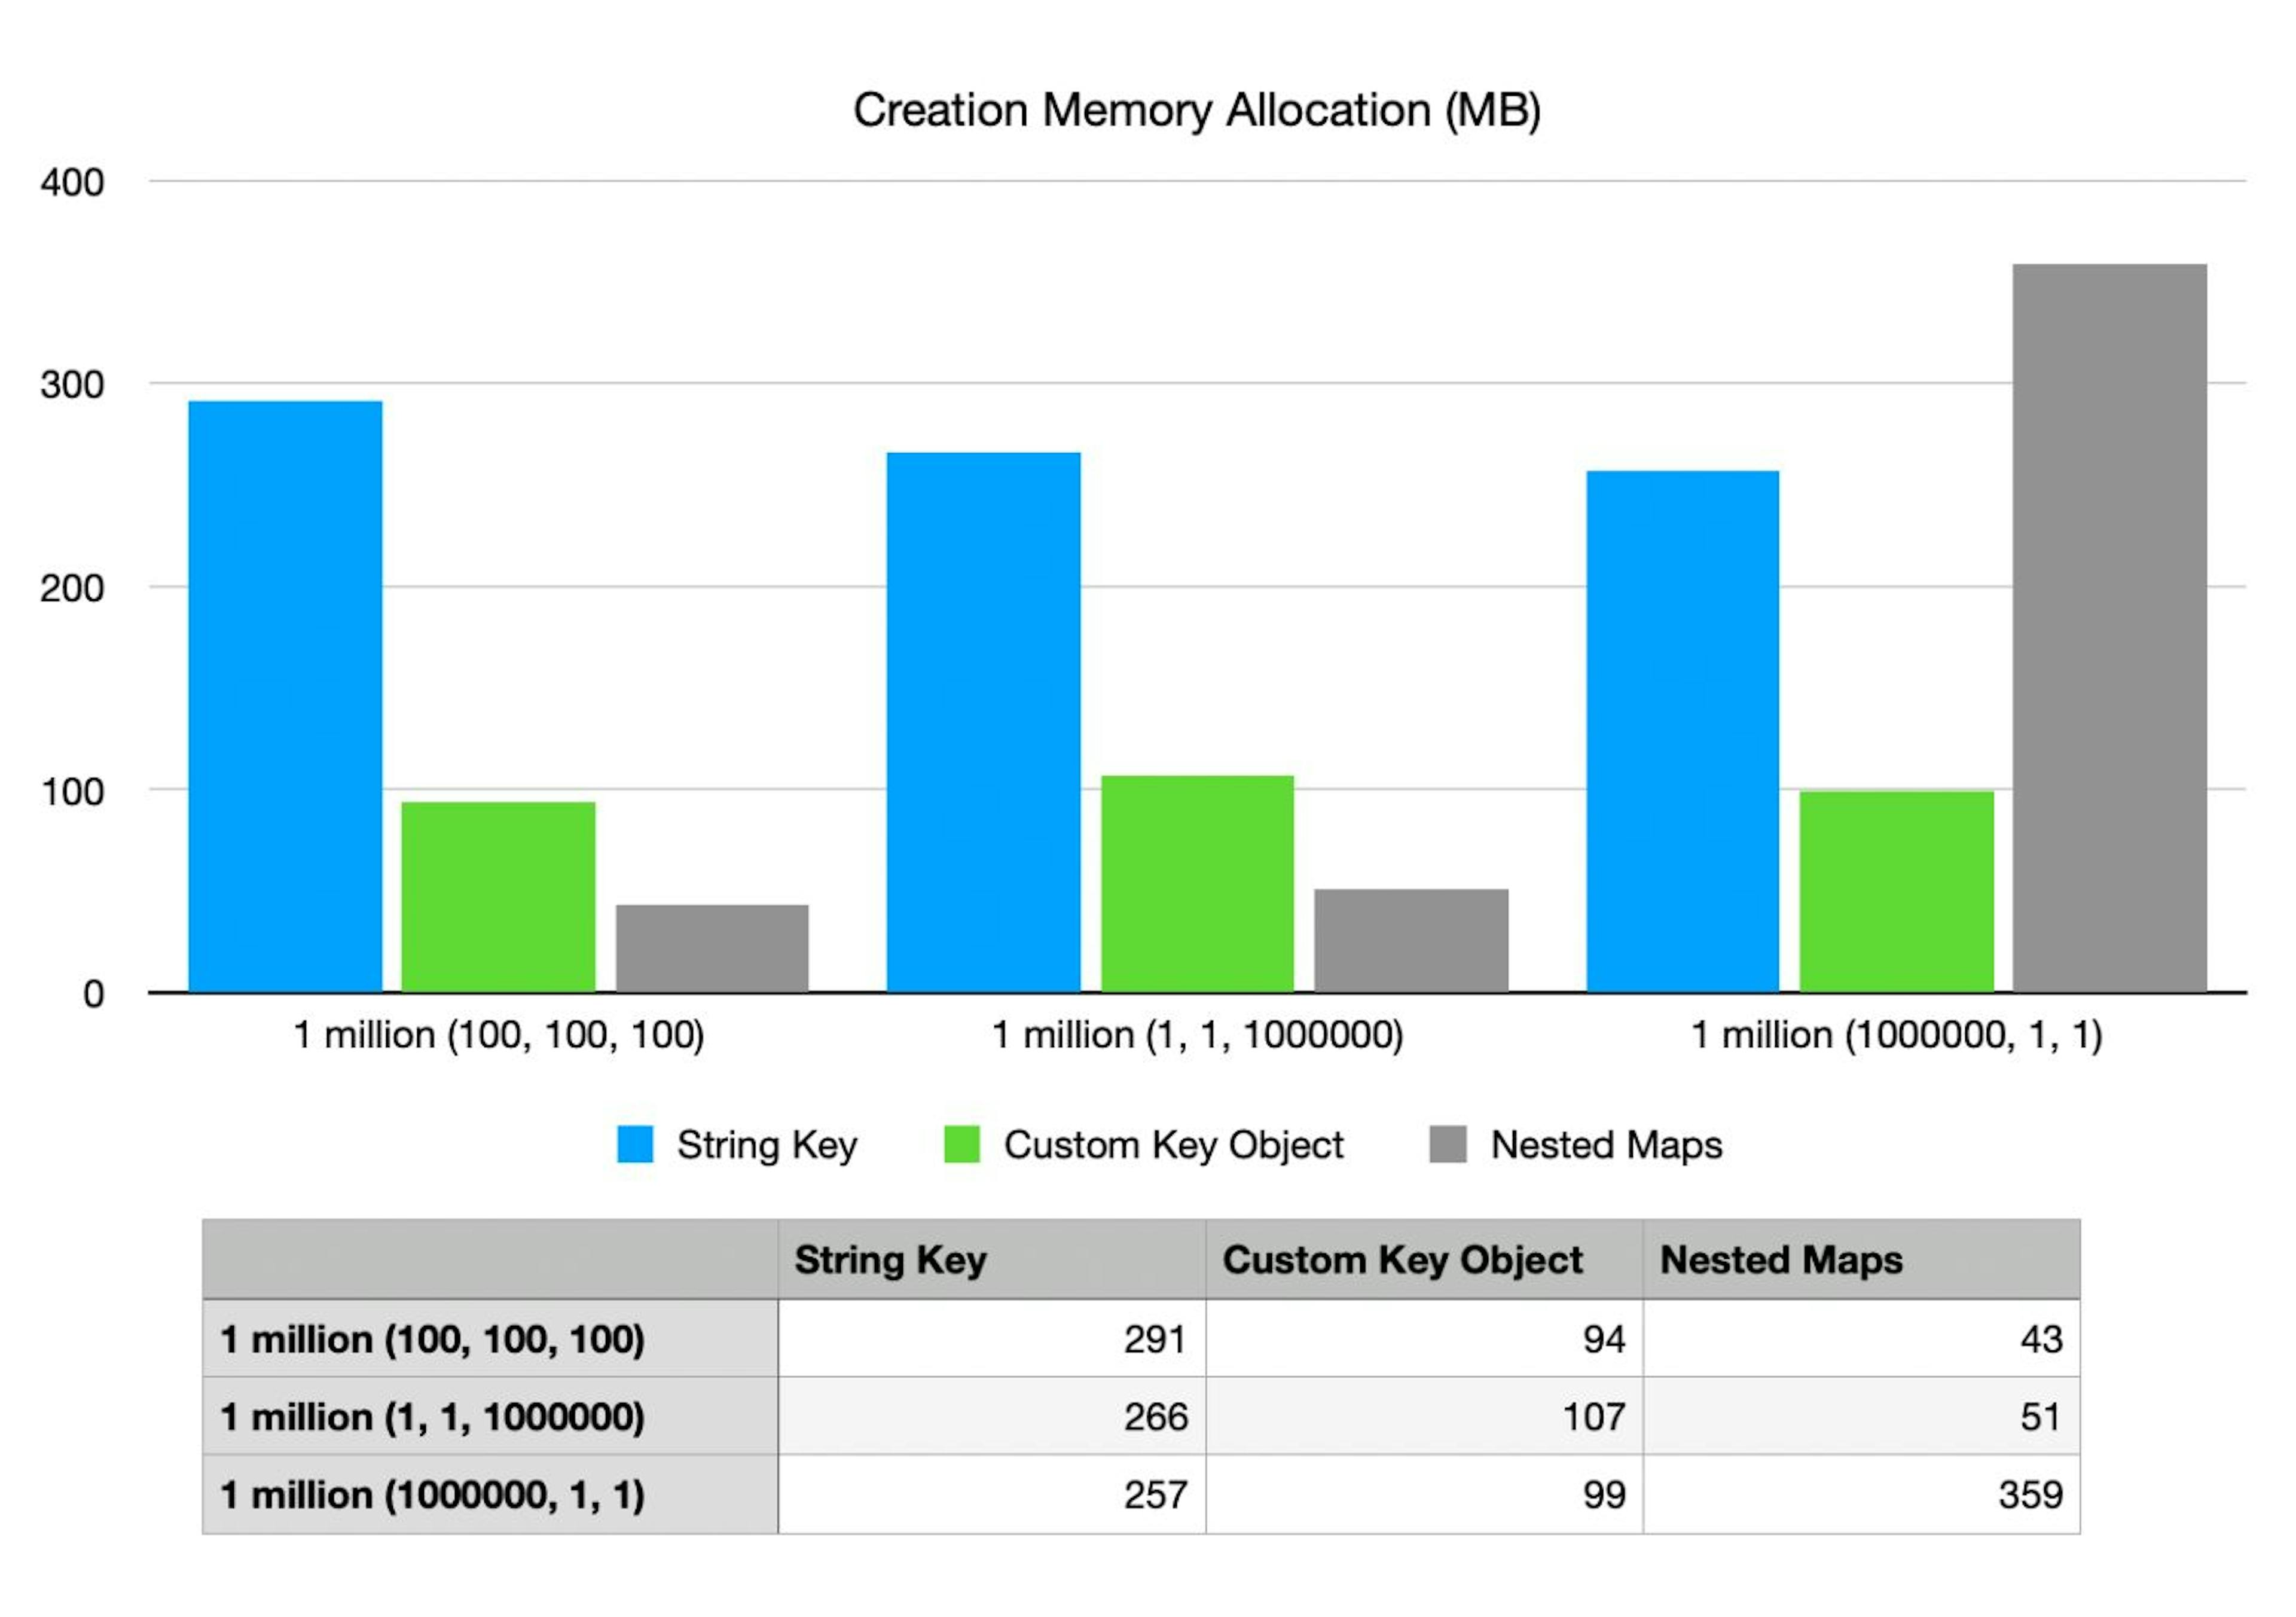 Metrics were grabbed using Intellij profiler and looking at memory allocations of the map(s) creation method